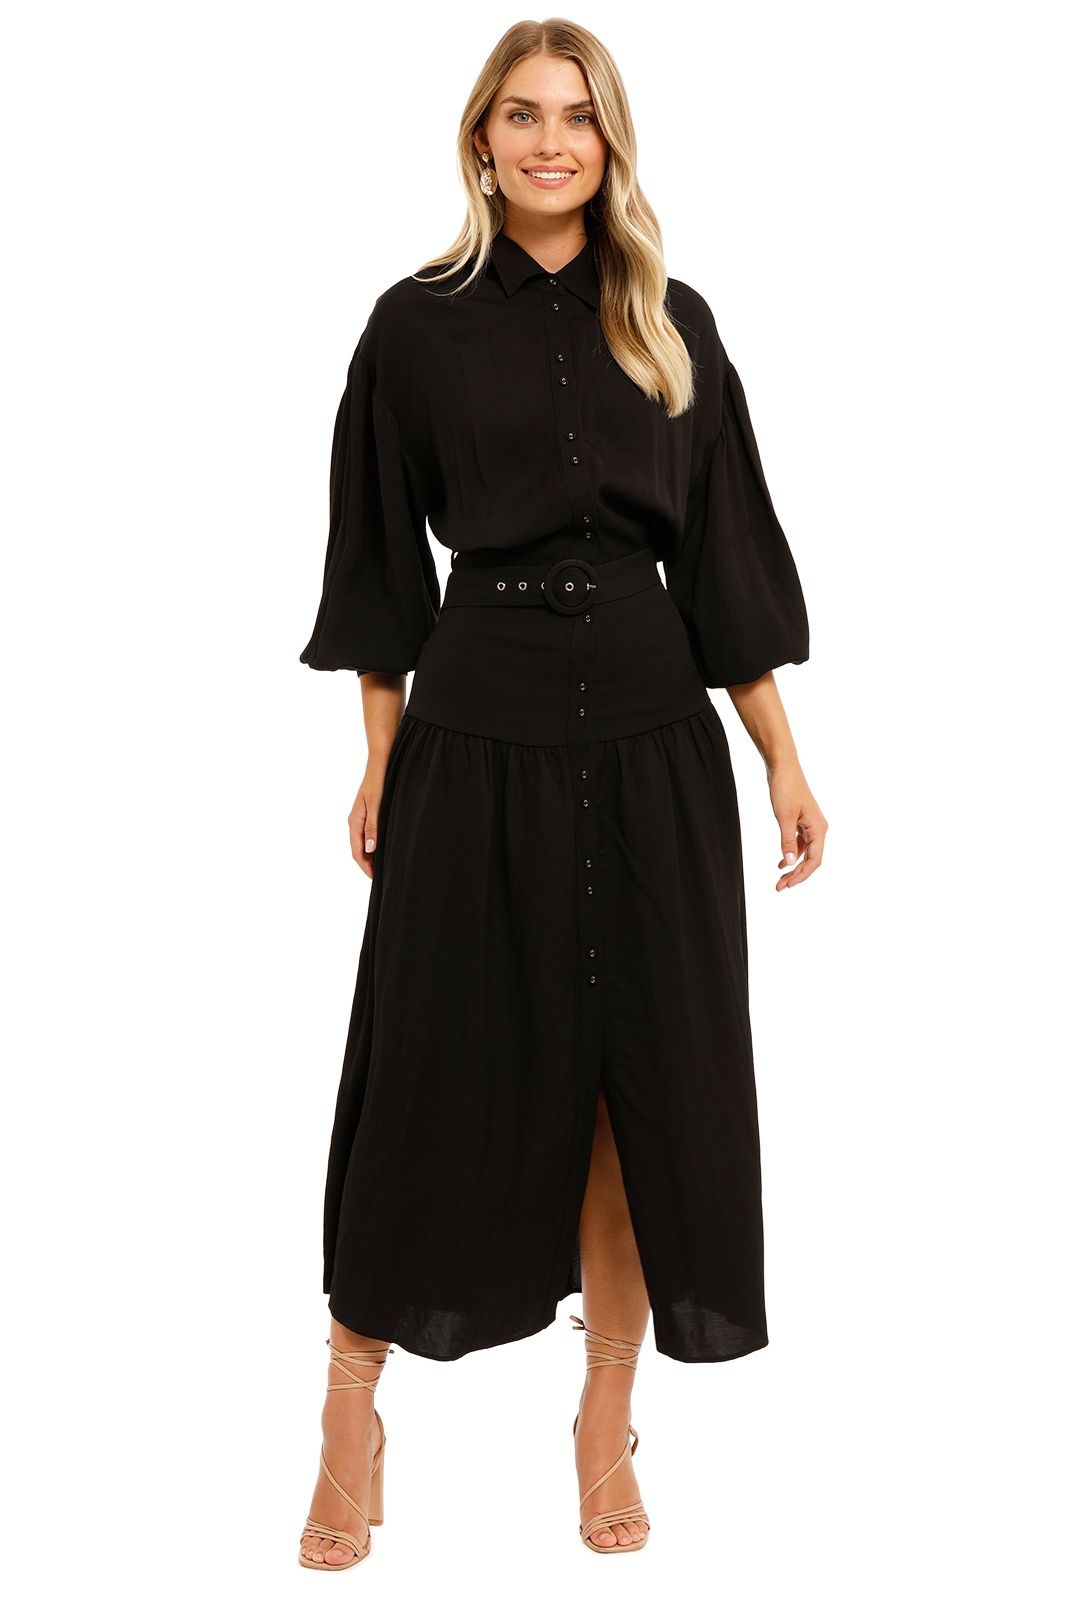 Pasduchas Young Lovers Midi Black belted